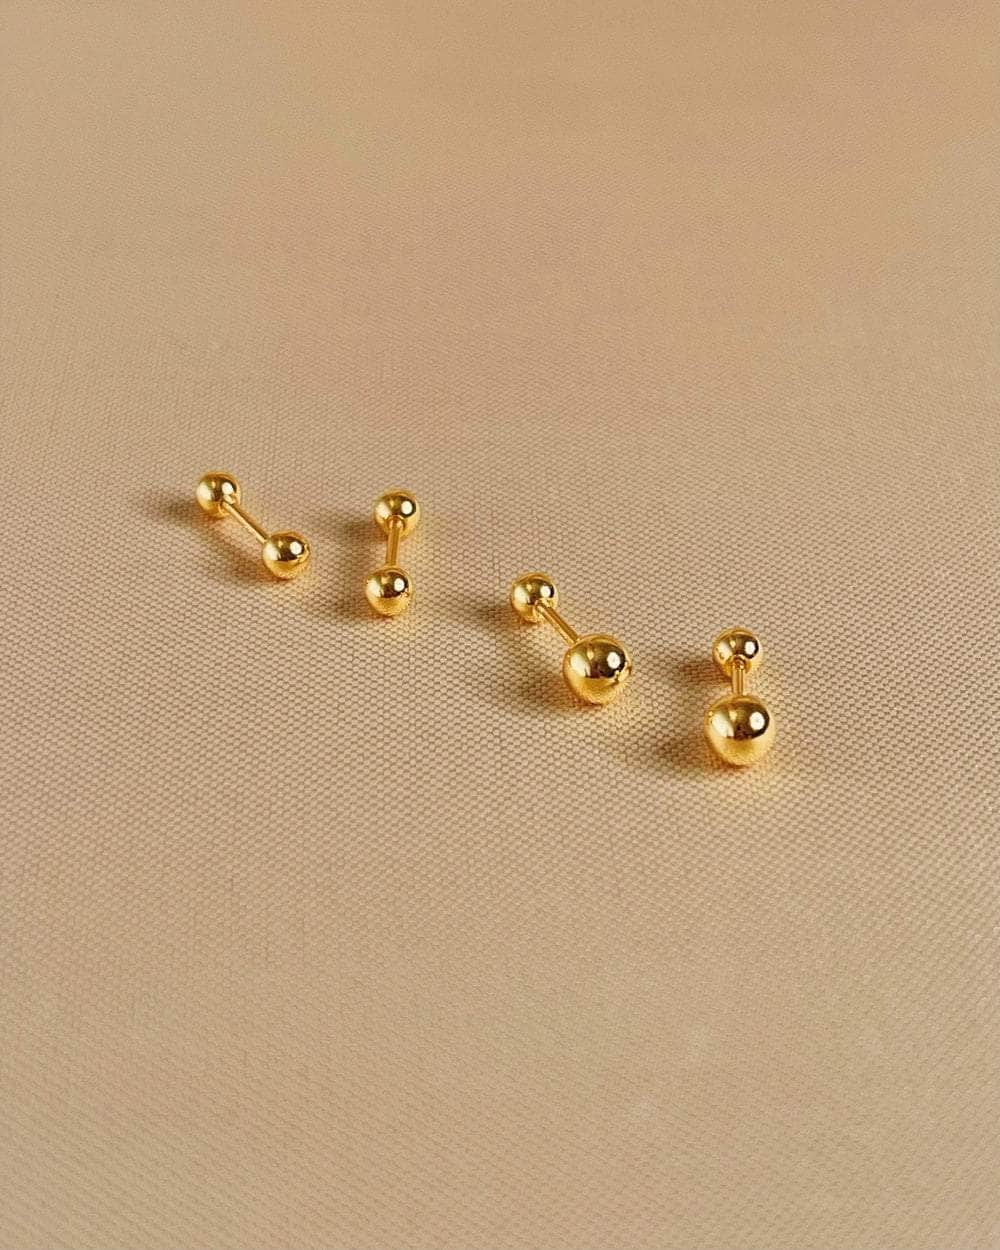 So Dainty Co. Studs Cali Gold Studs (Choose 1 — 3mm / 4mm) Gold Plated 925 Sterling Silver Jewelry